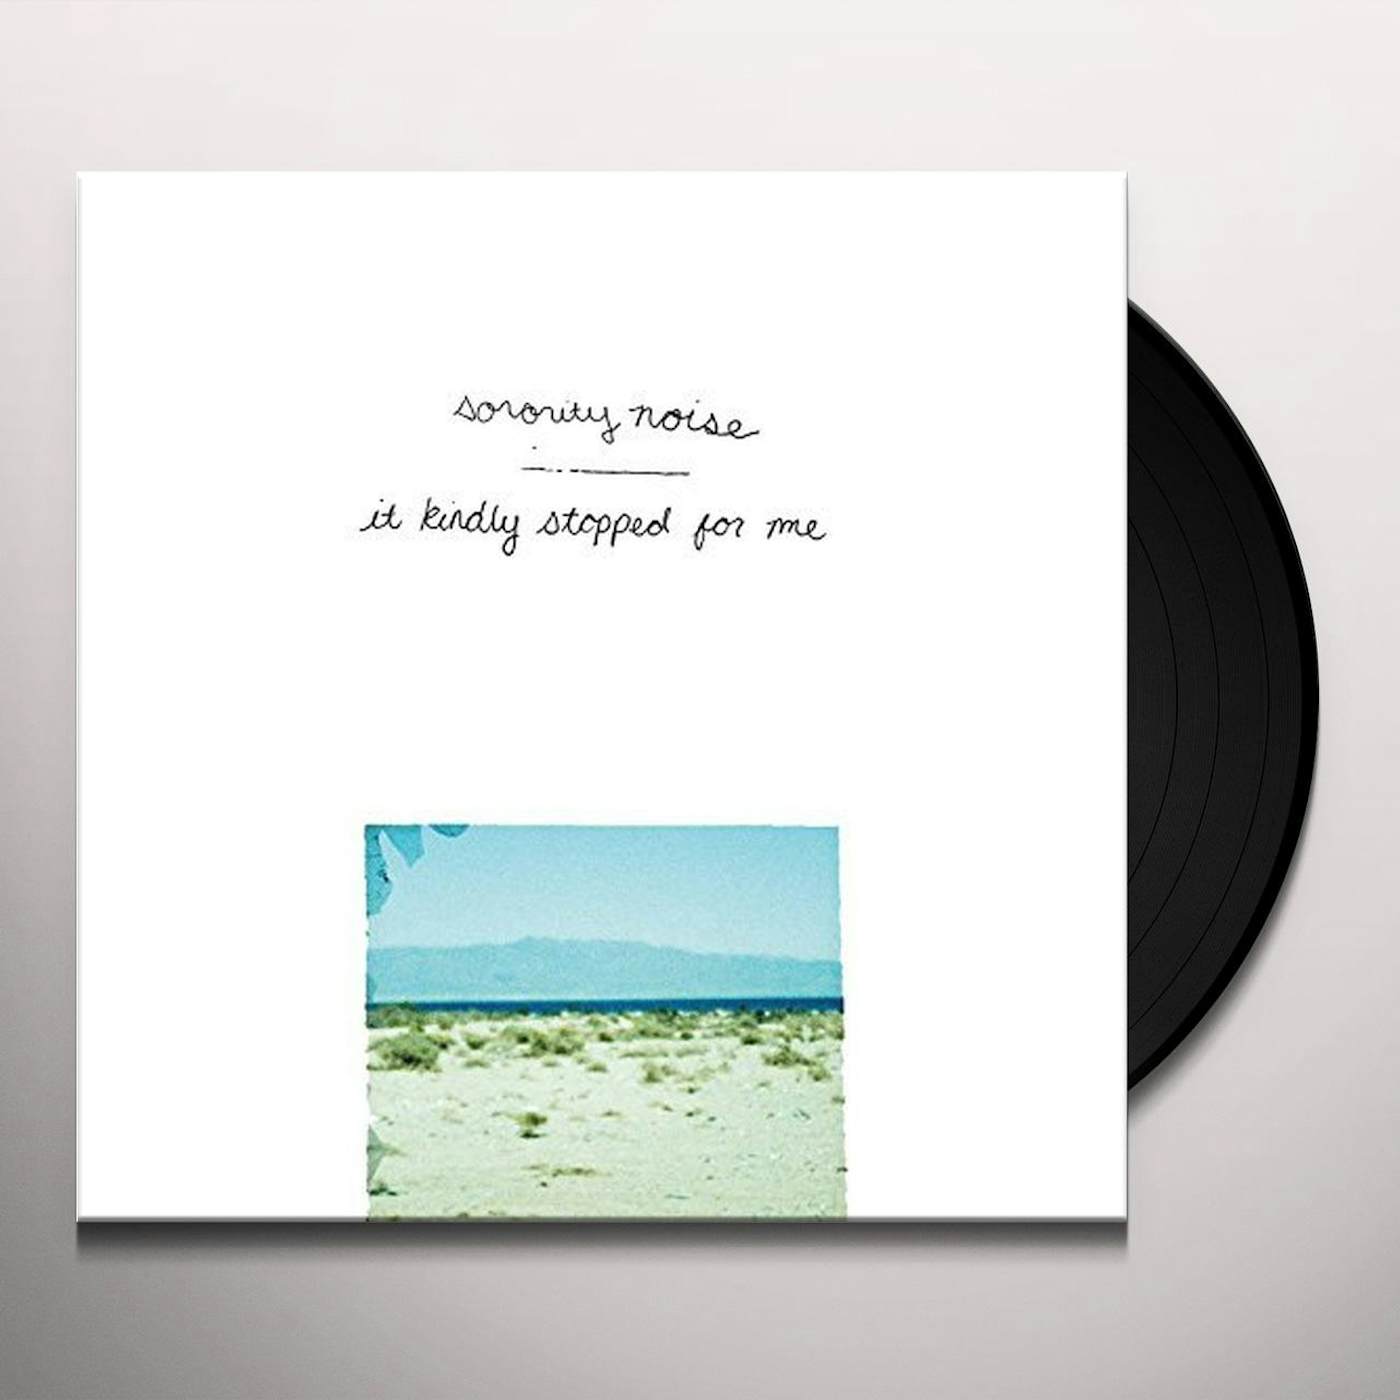 Sorority Noise It Kindly Stopped for Me Vinyl Record